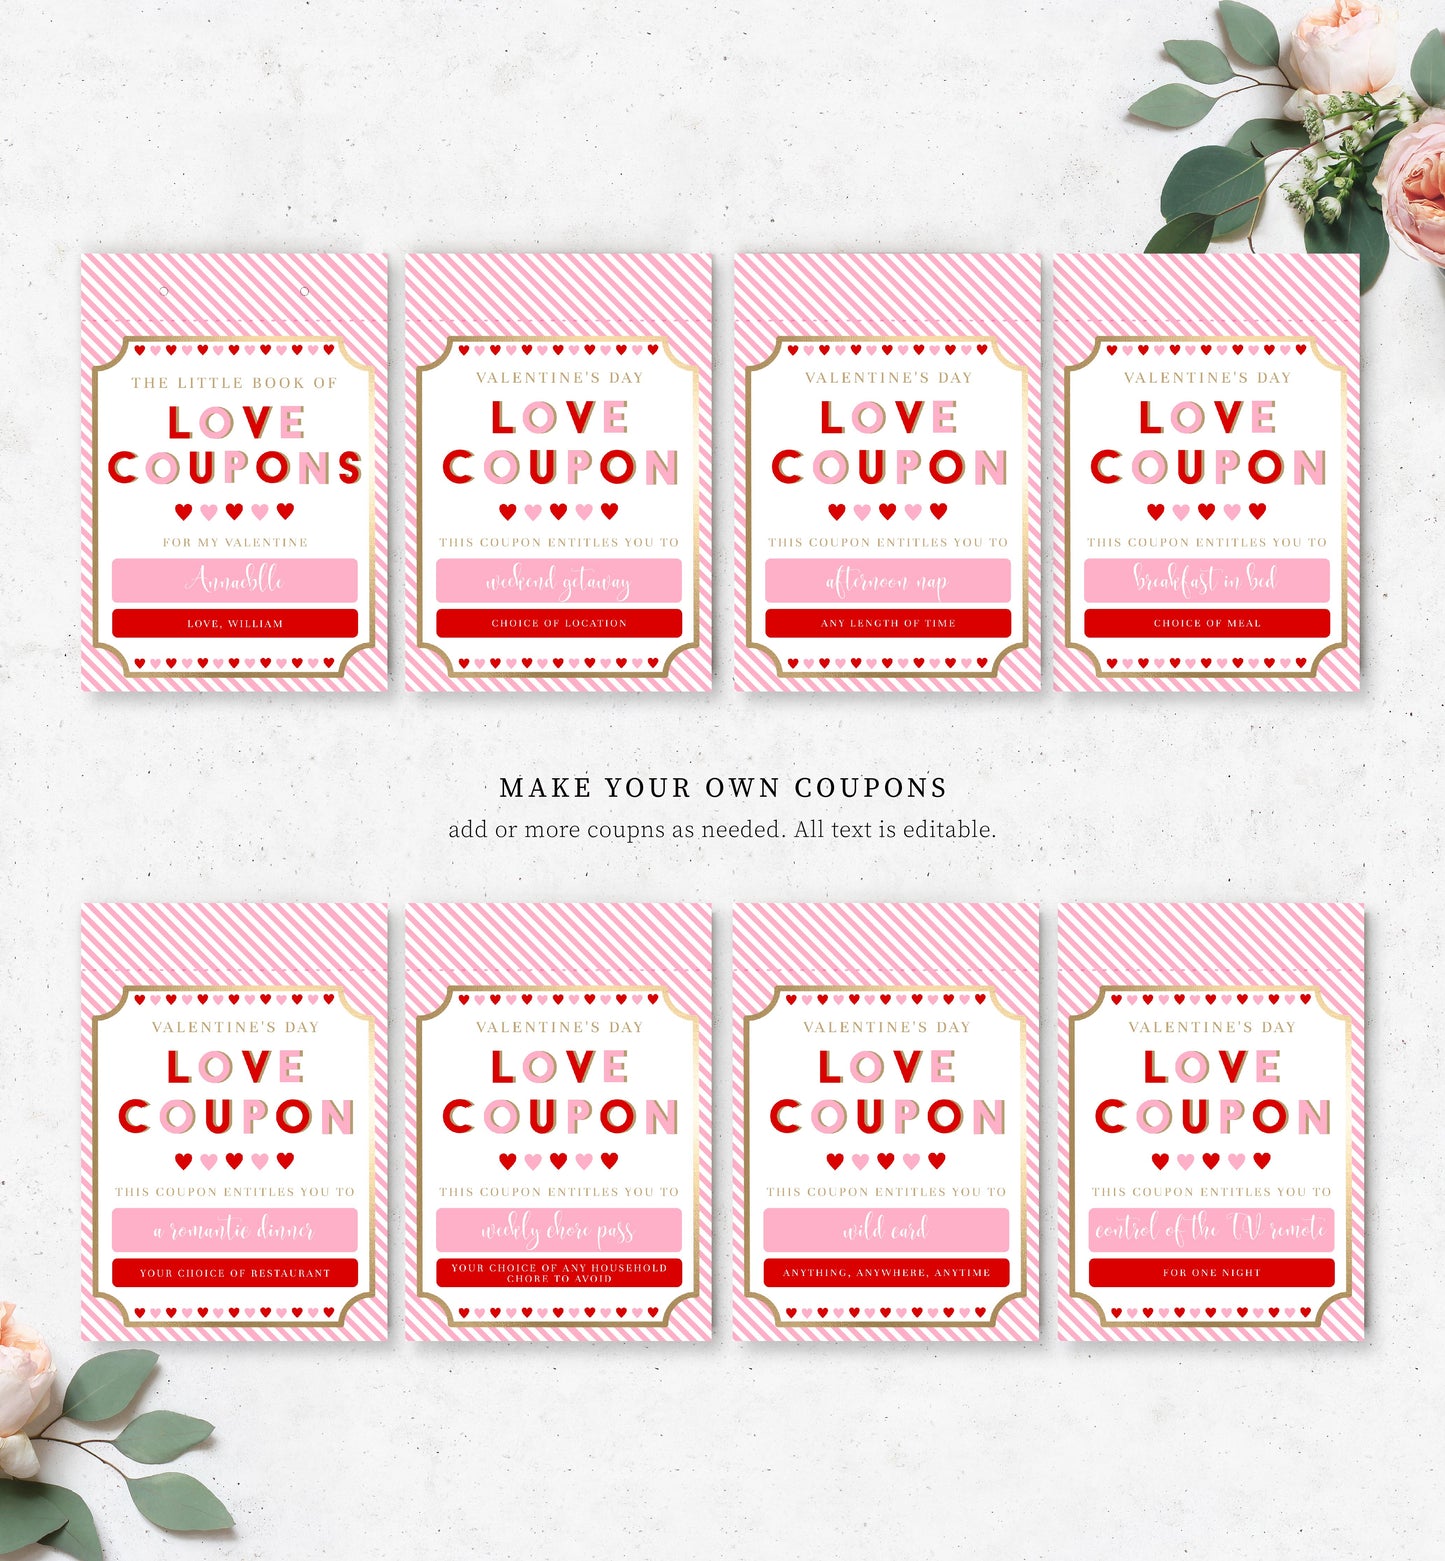 Editable Love Coupon Book, Personalised Valentine's Day Gift Love Coupons, Printable Couples Love Coupons, Romantic Gift, Thoughtful GiftEditable Love Coupon Book, Personalised Valentine's Day Gift Love Coupons, Printable Couples Love Coupons, Romantic Gift, Thoughtful Gift